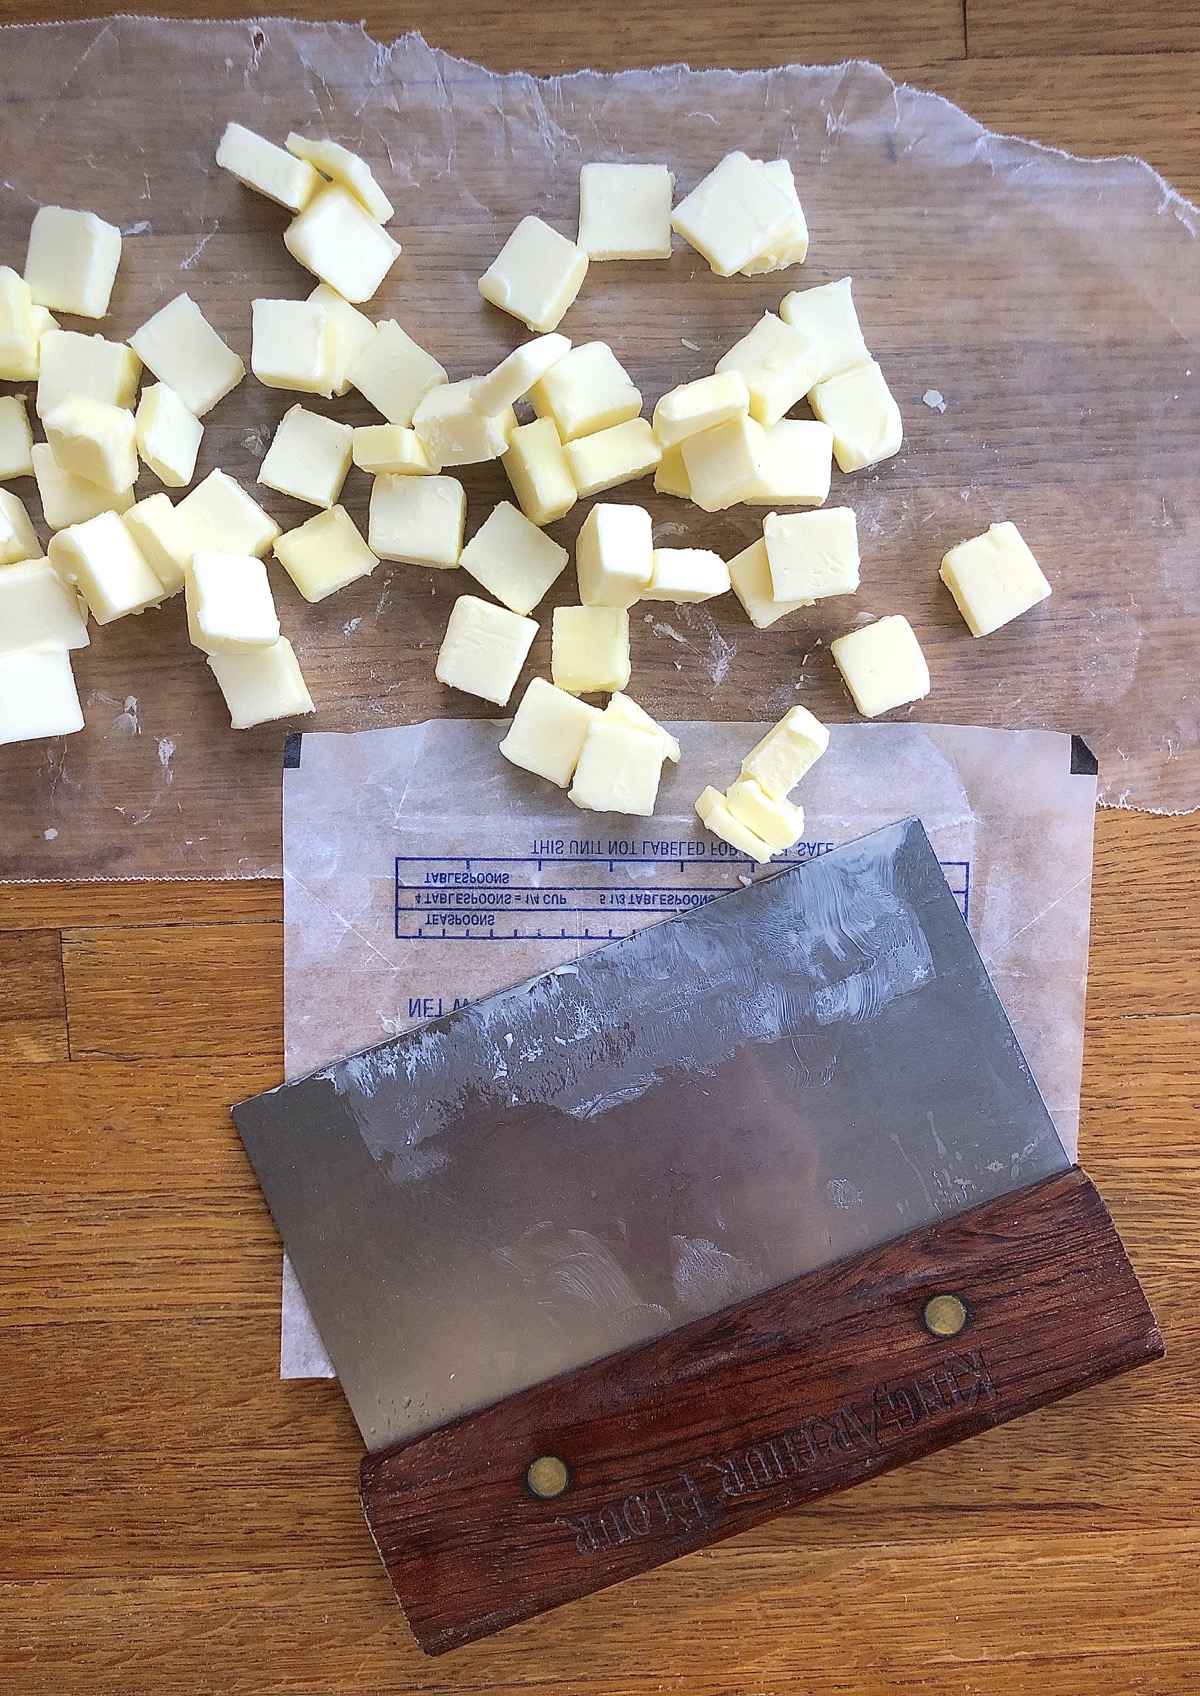 Pile of 1/2" butter cubes with bench knife